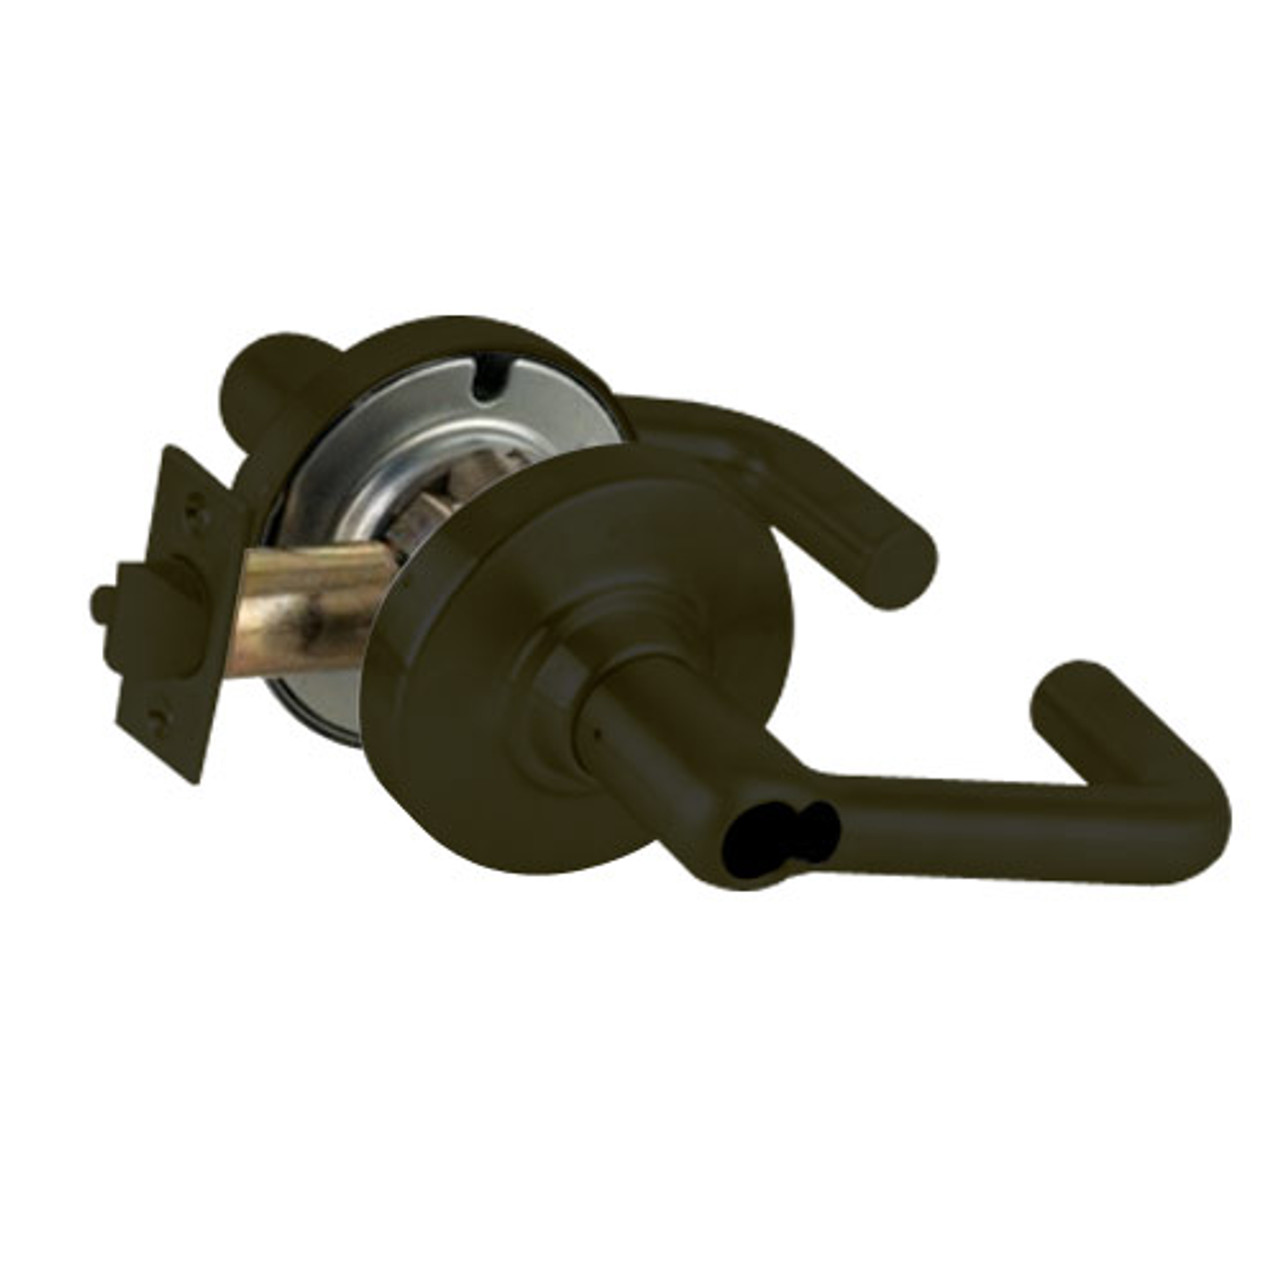 ND73JD-TLR-613 Schlage Tubular Cylindrical Lock in Oil Rubbed Bronze